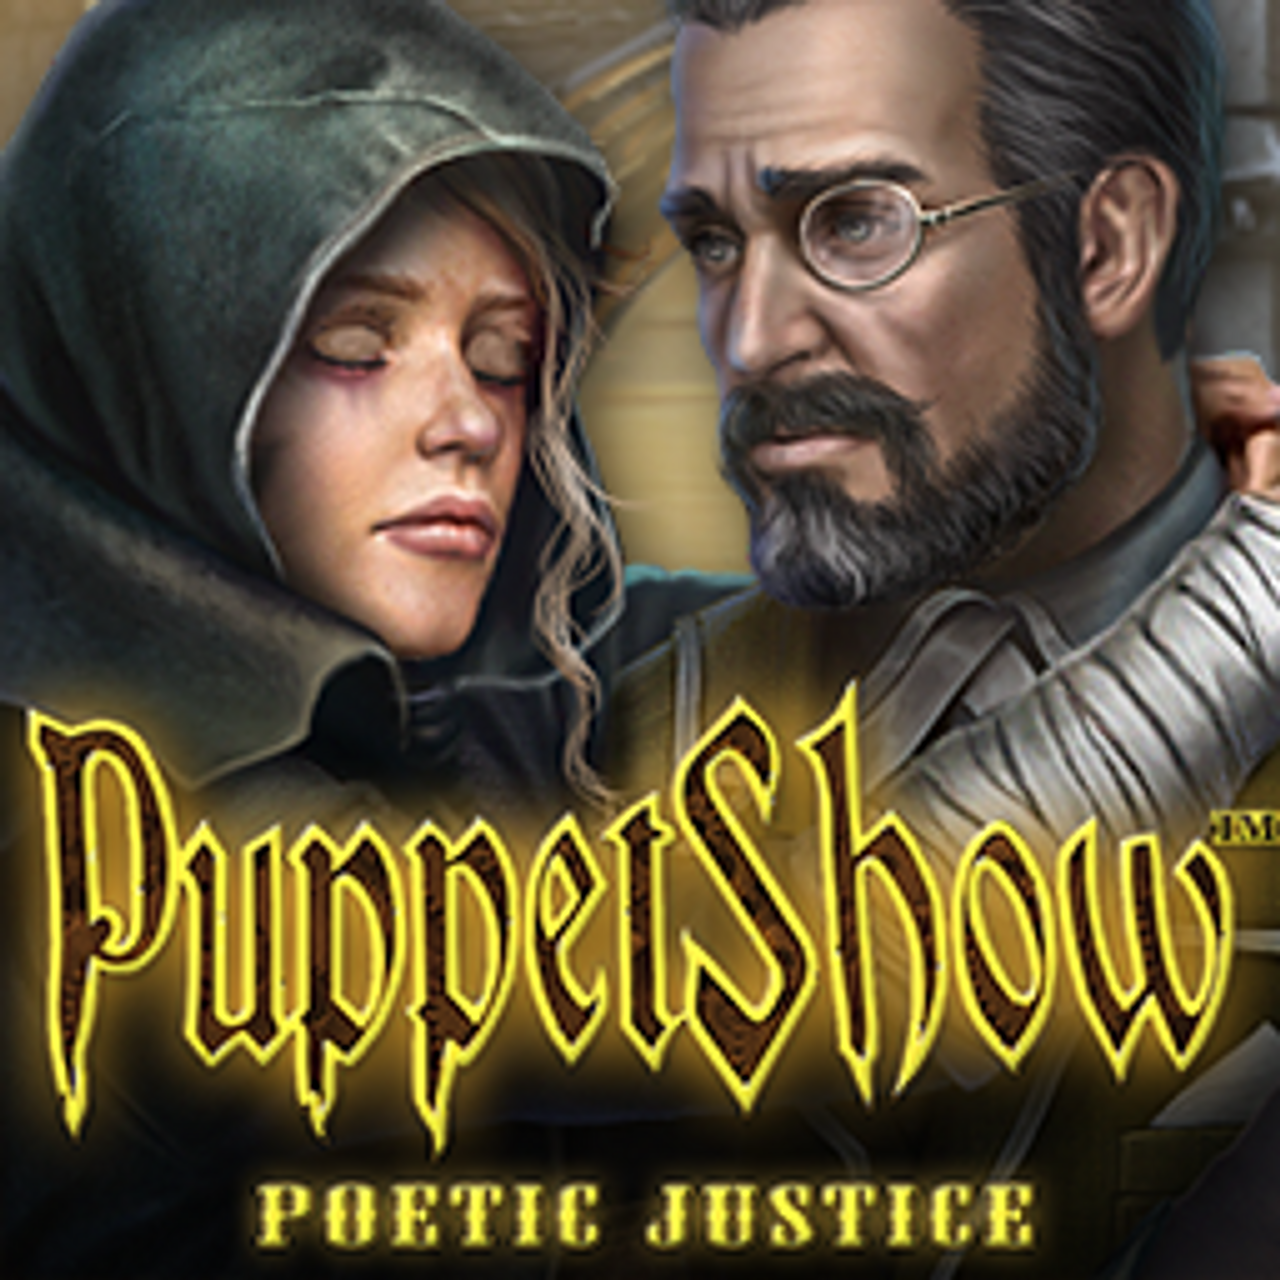 PuppetShow: Poetic Justice